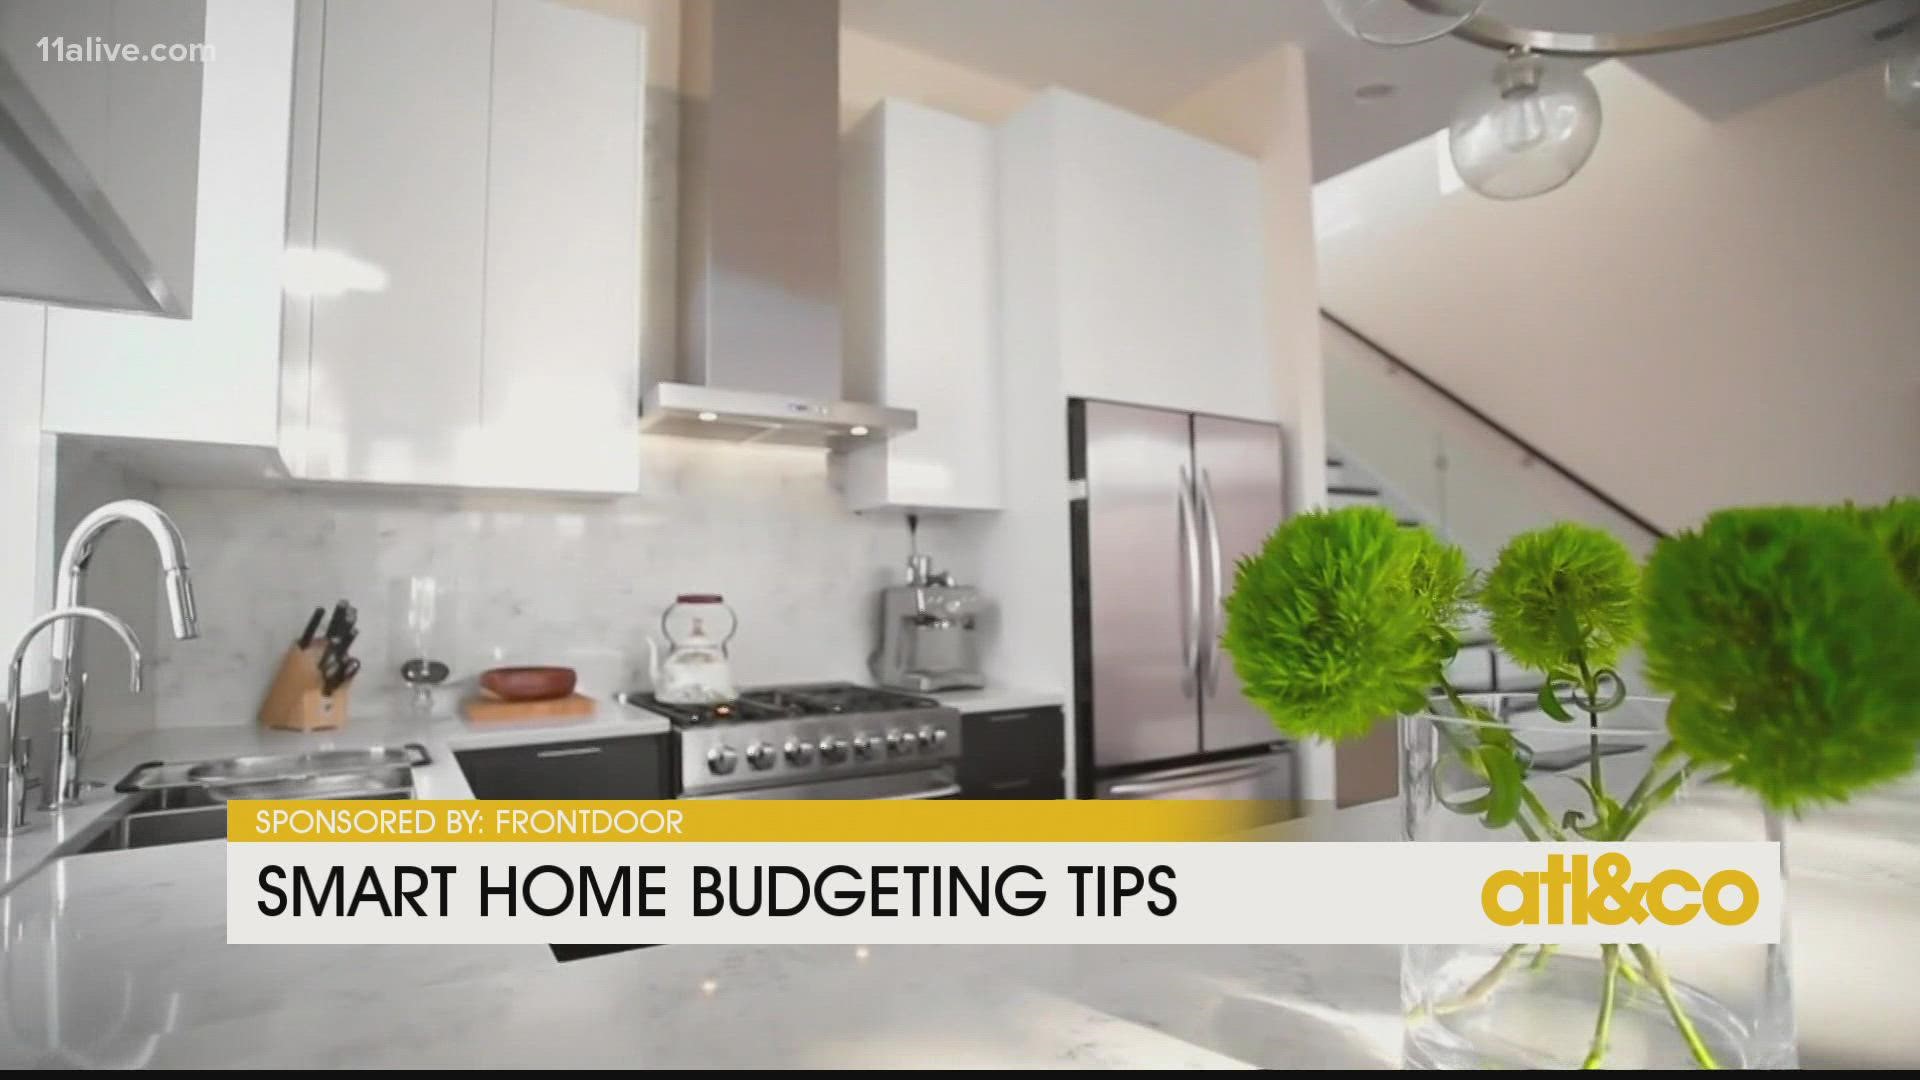 A personal finance expert shares budgeting tips for the new year with Frontdoor.